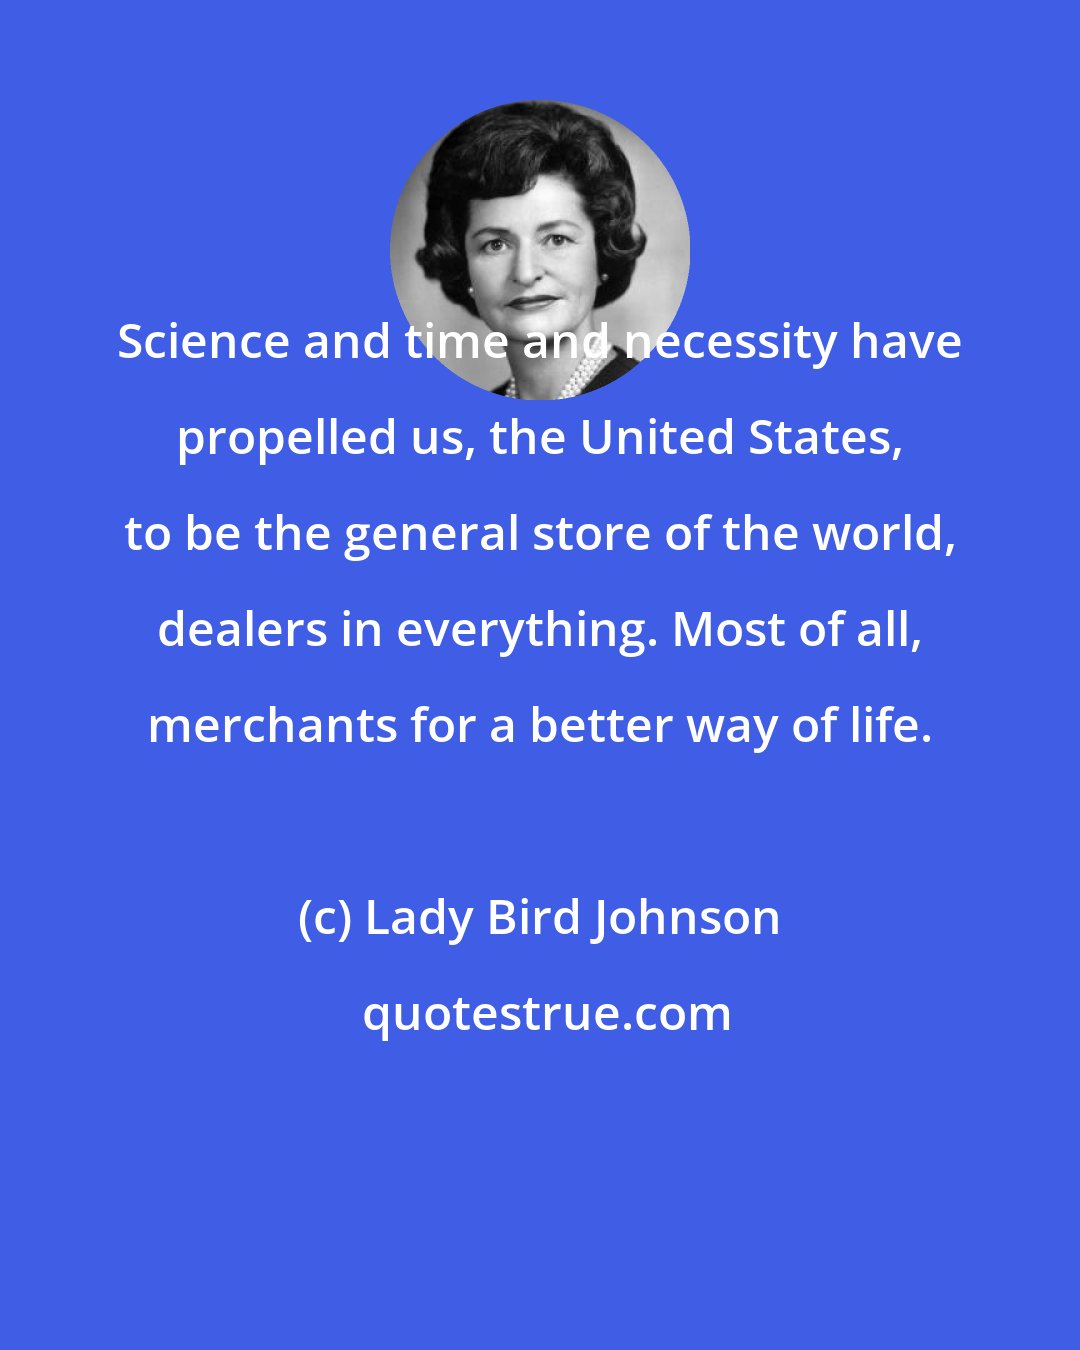 Lady Bird Johnson: Science and time and necessity have propelled us, the United States, to be the general store of the world, dealers in everything. Most of all, merchants for a better way of life.